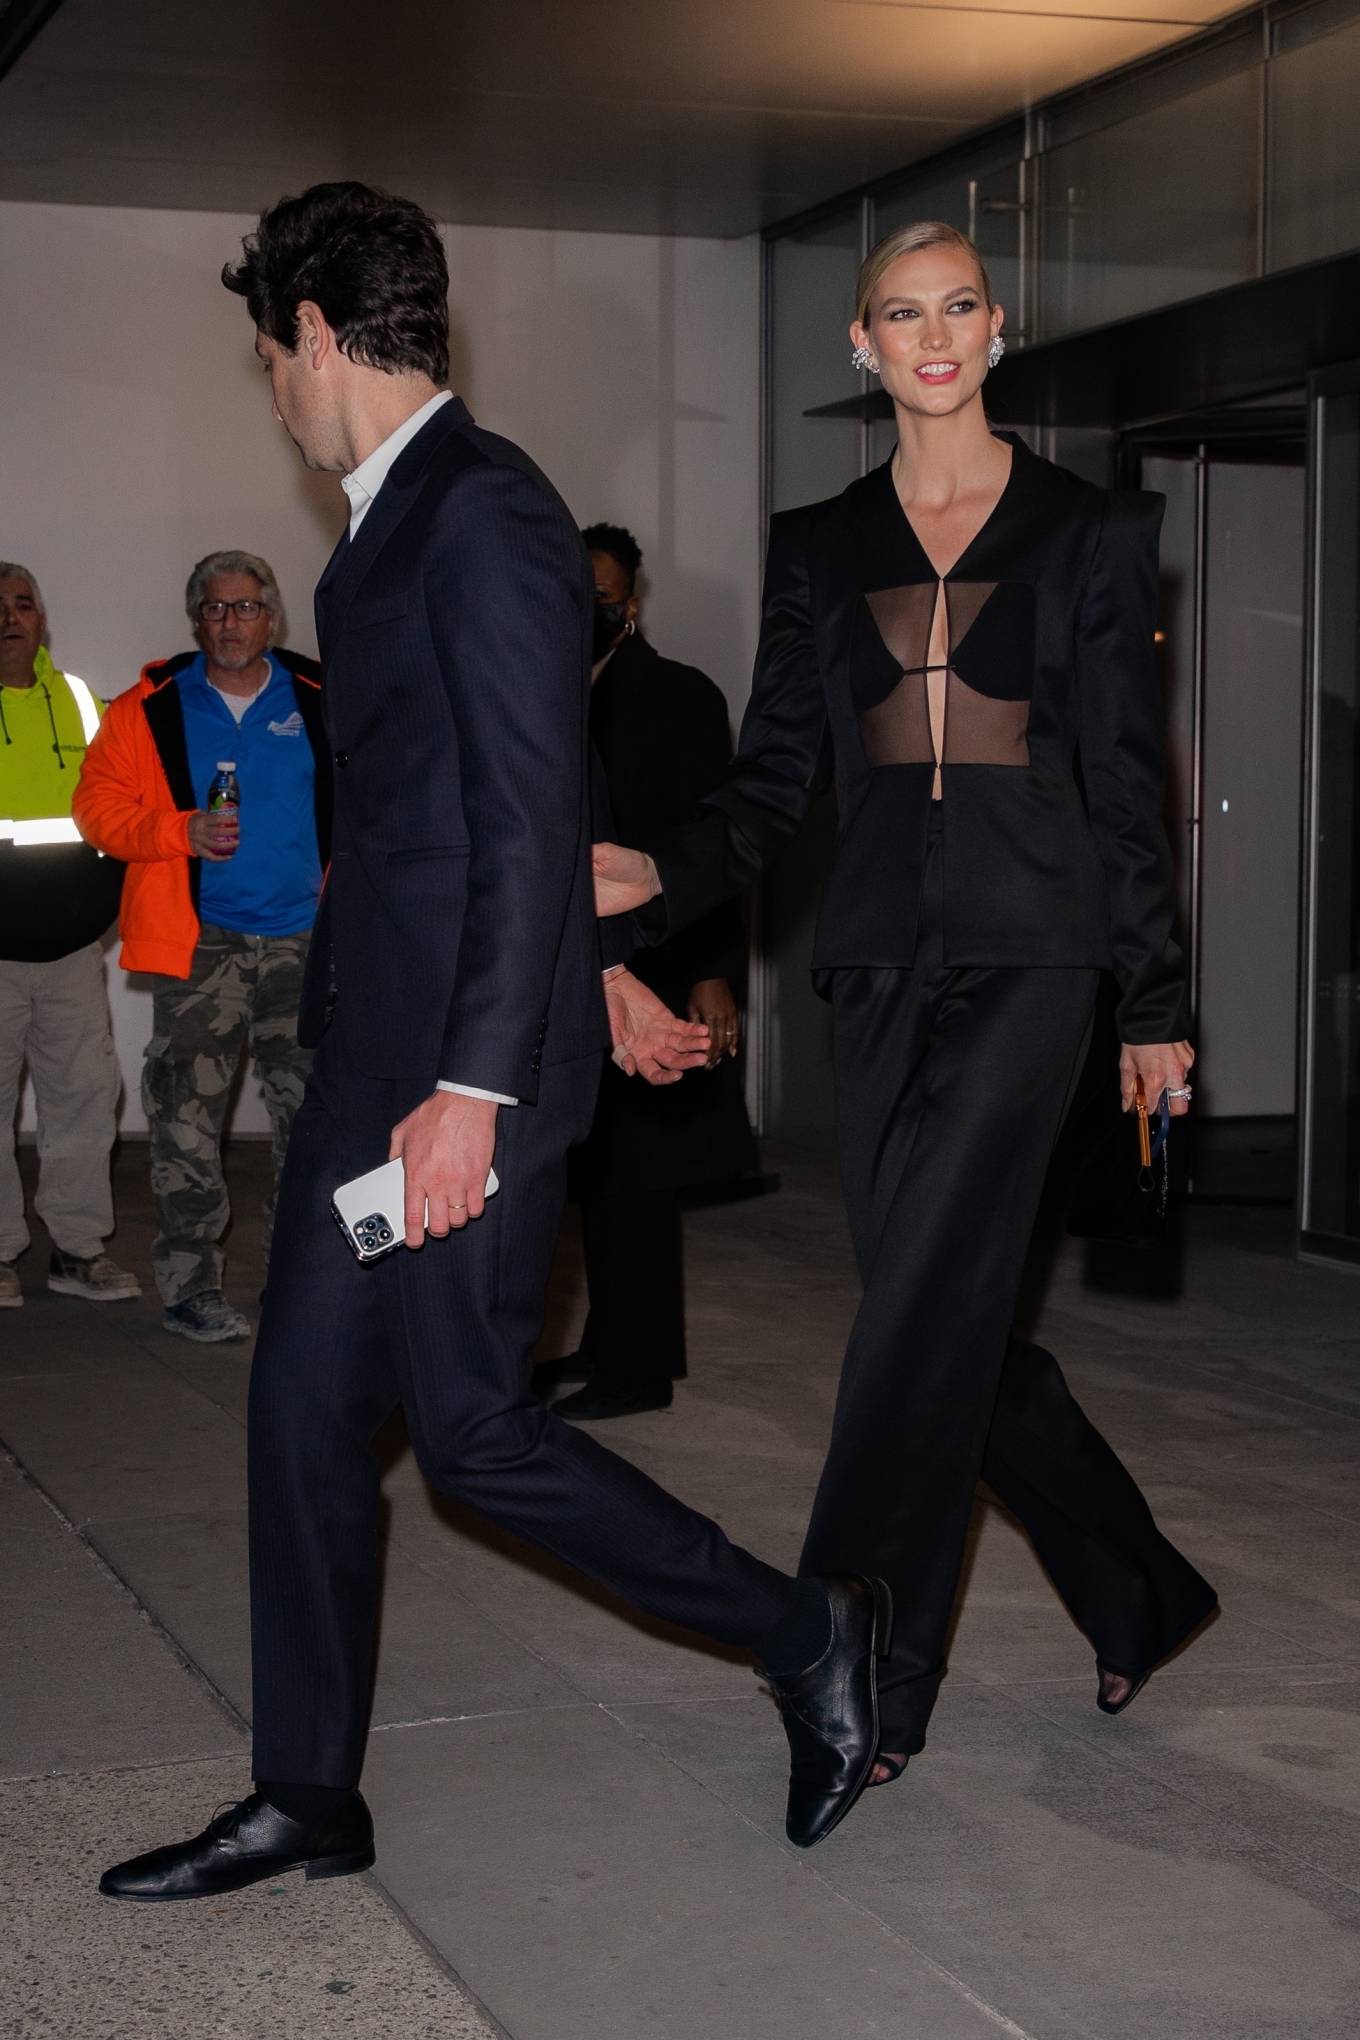 Karlie Kloss 2021 : Karlie Kloss – In a black resemble stepping out in New York City-08